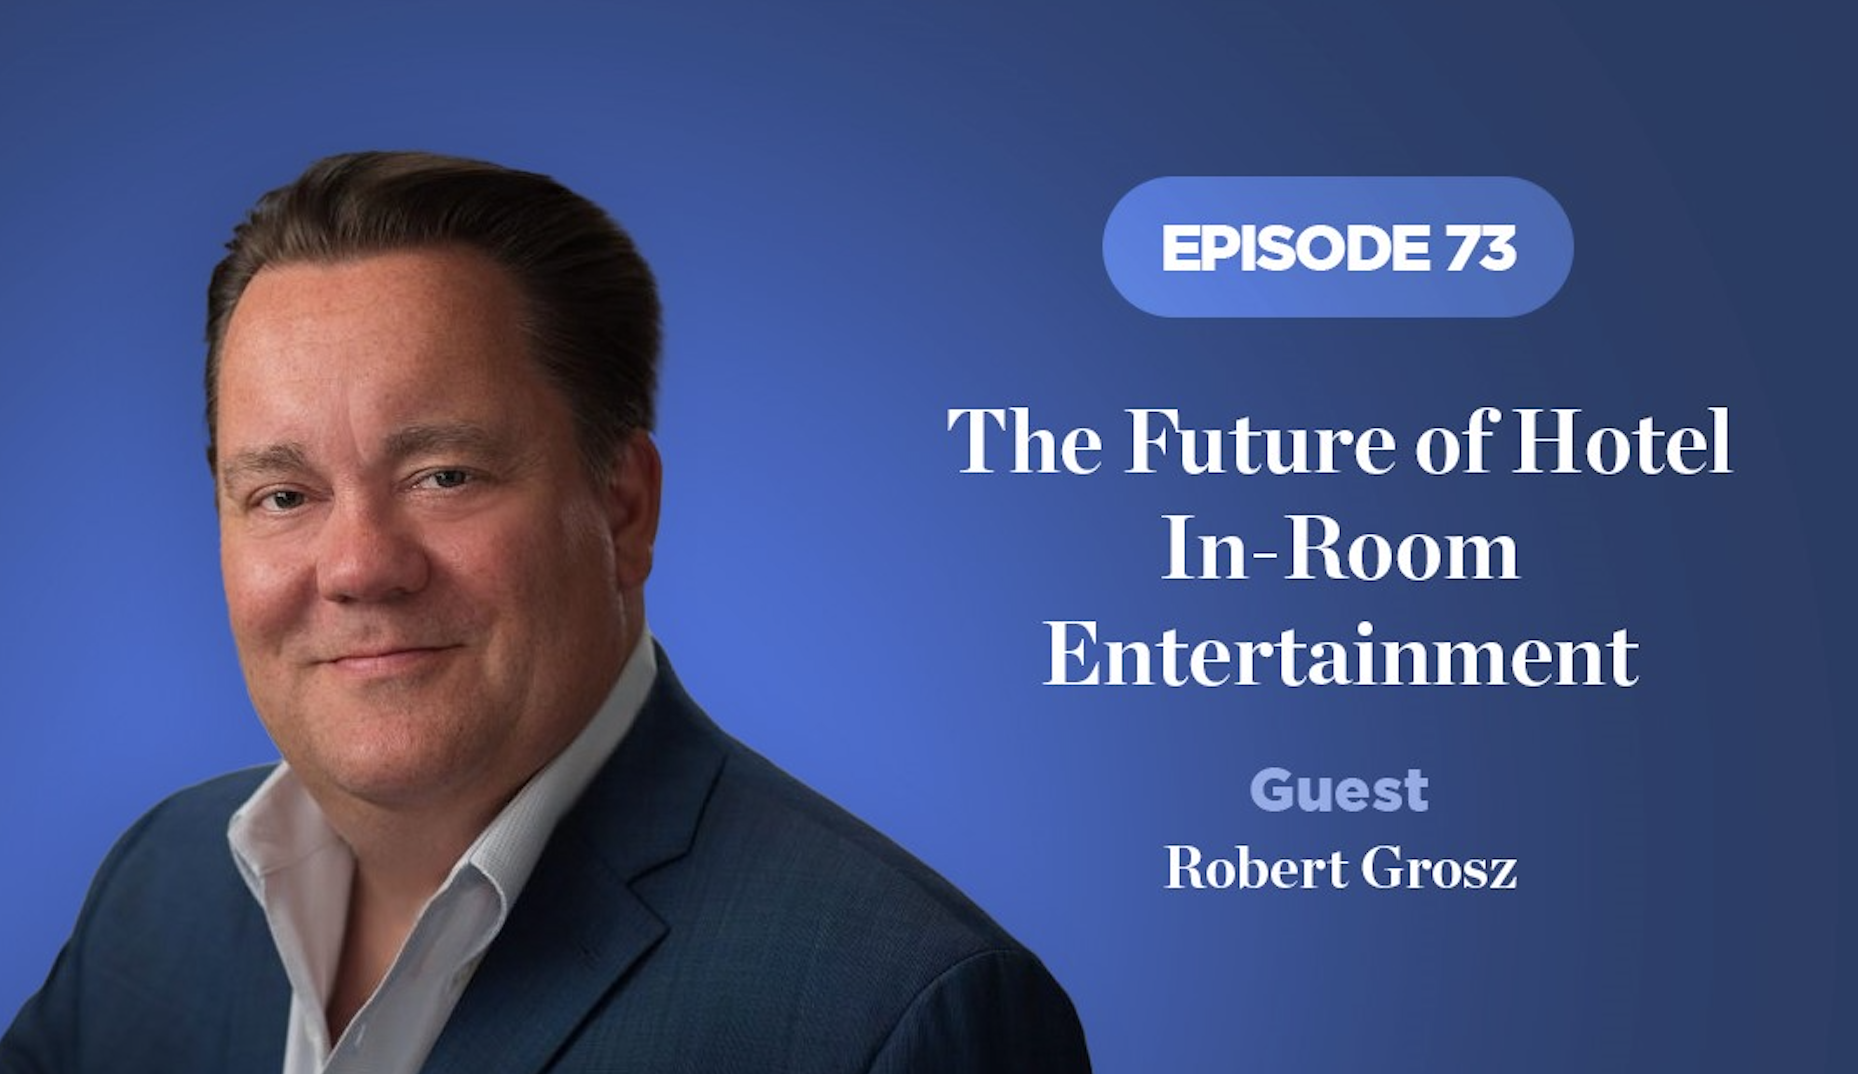 ad for podcast discussion of in-room entertainment